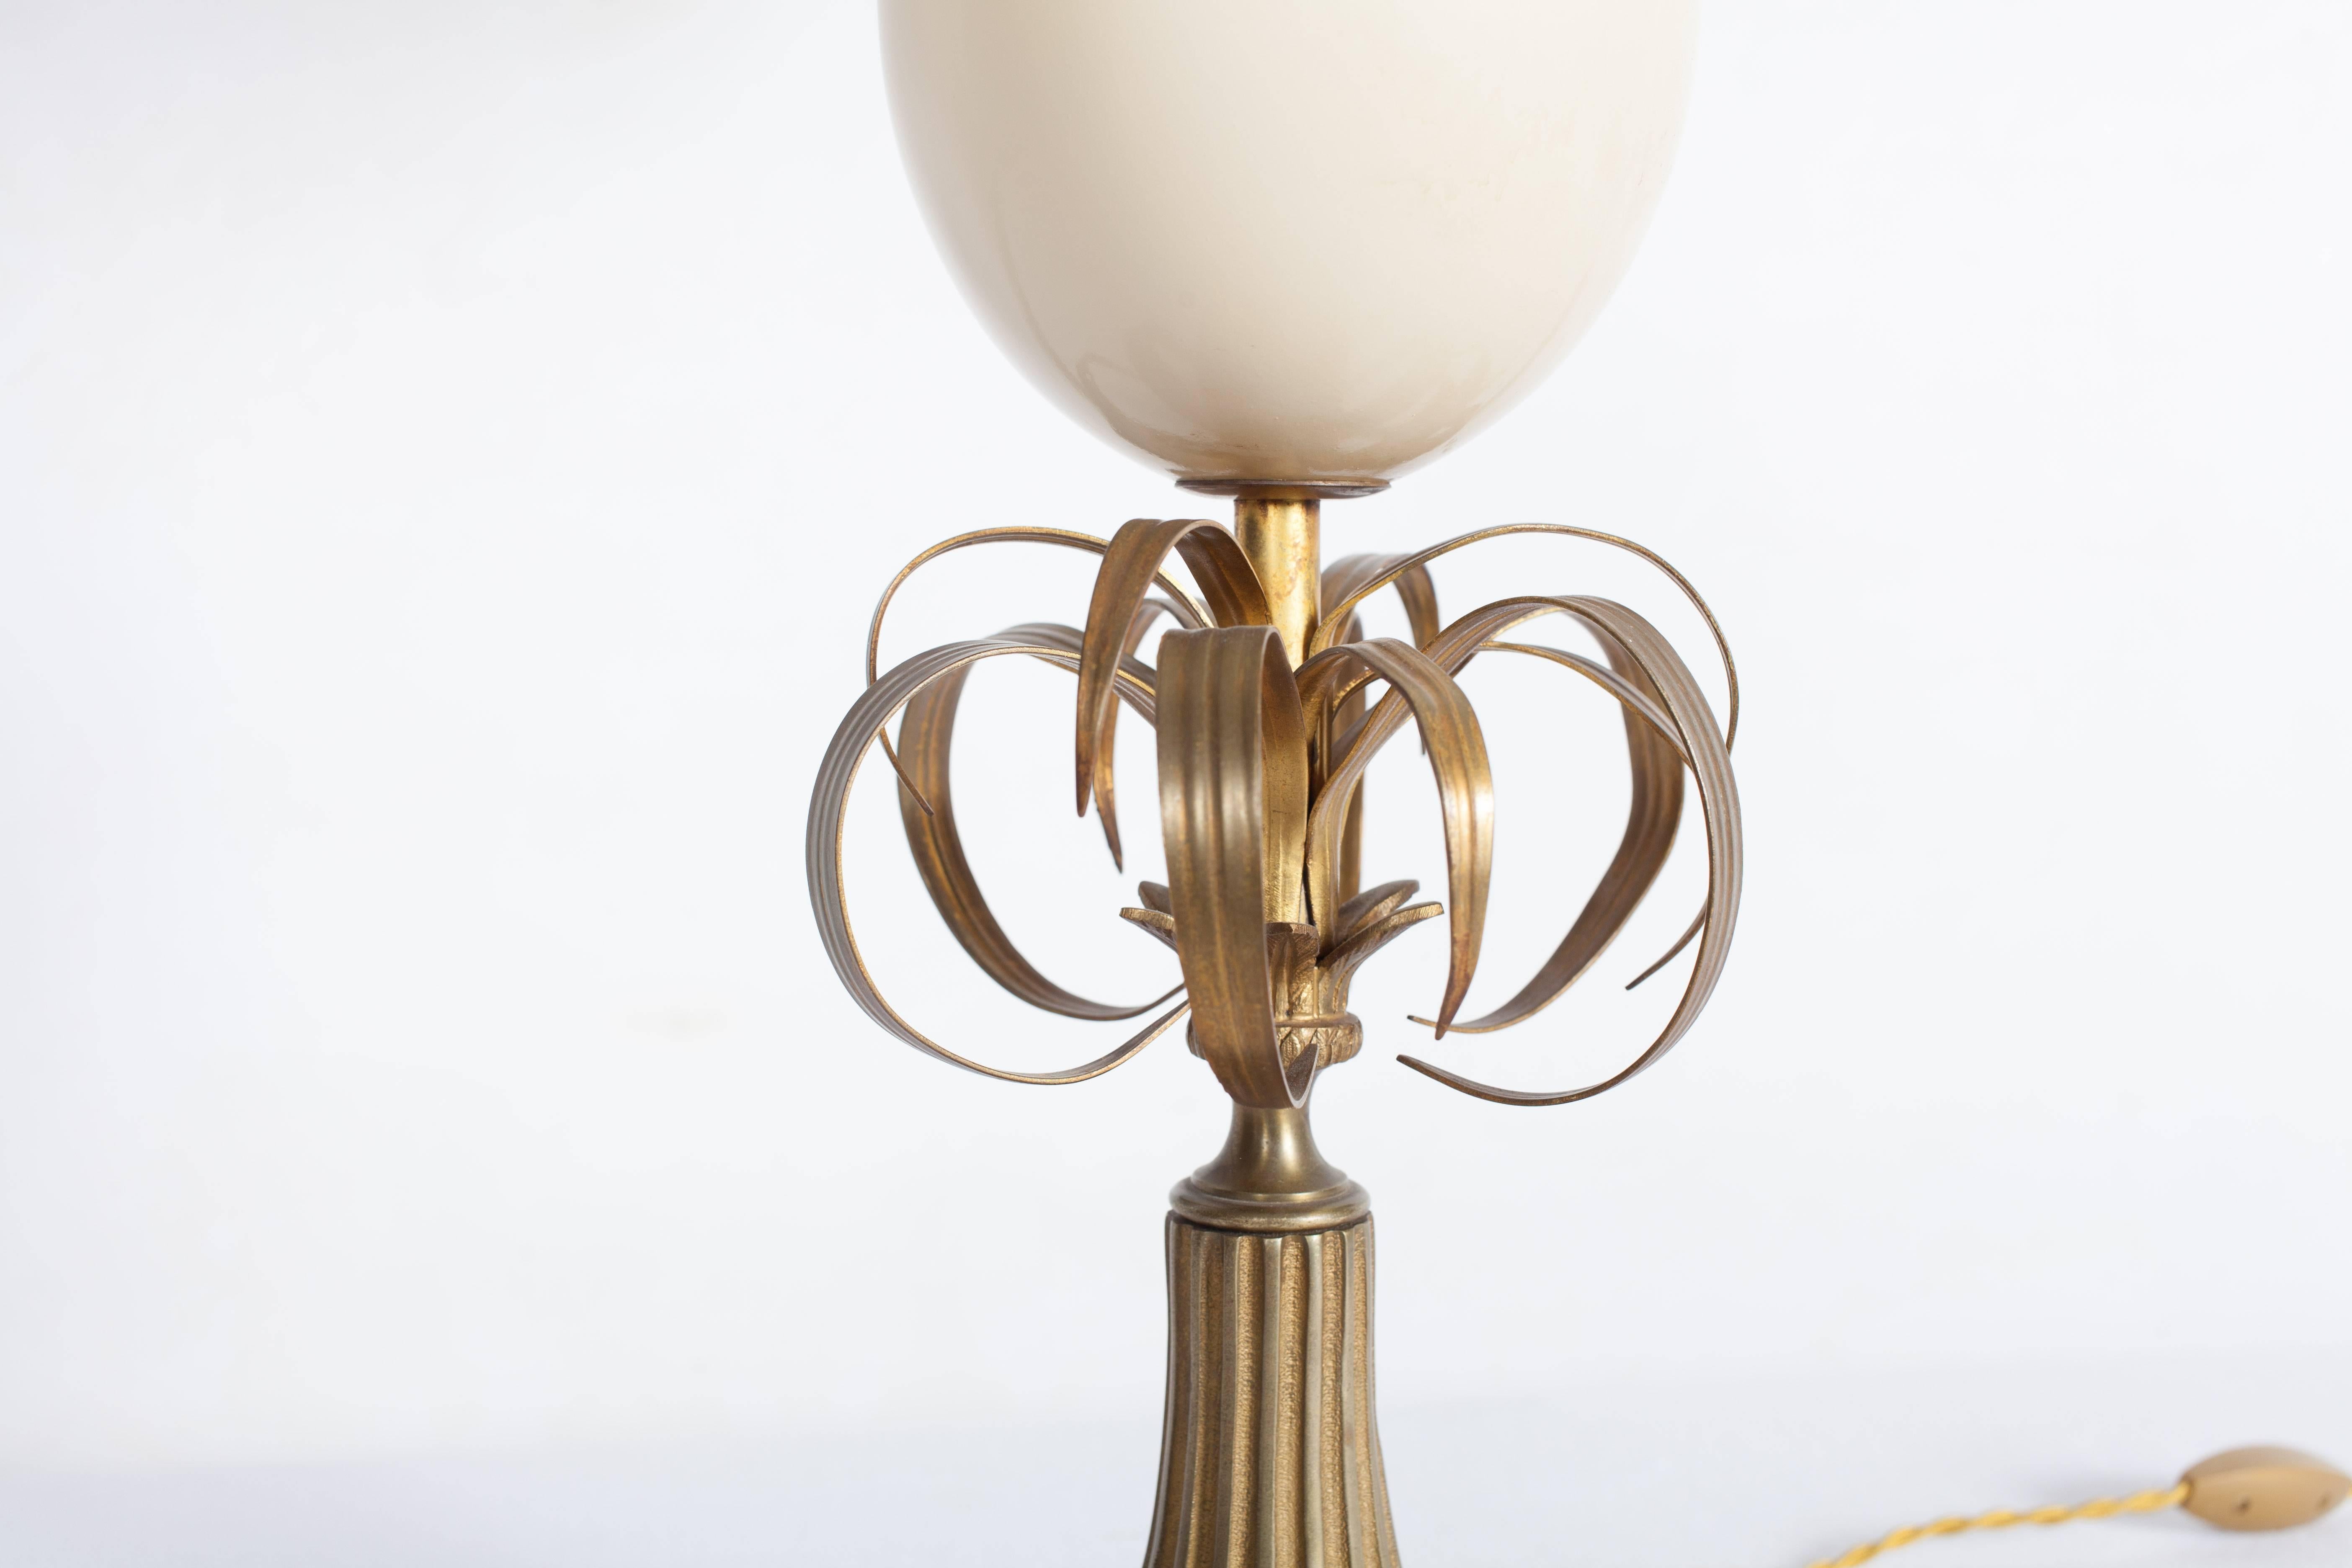 Maison Jansen decorative table lamp.
An ostrich egg with brass leaves gives this a palm tree lamp effect.
France, 1970.
Would fit well in an eclectic Hollywood Regency inspired interior.

    